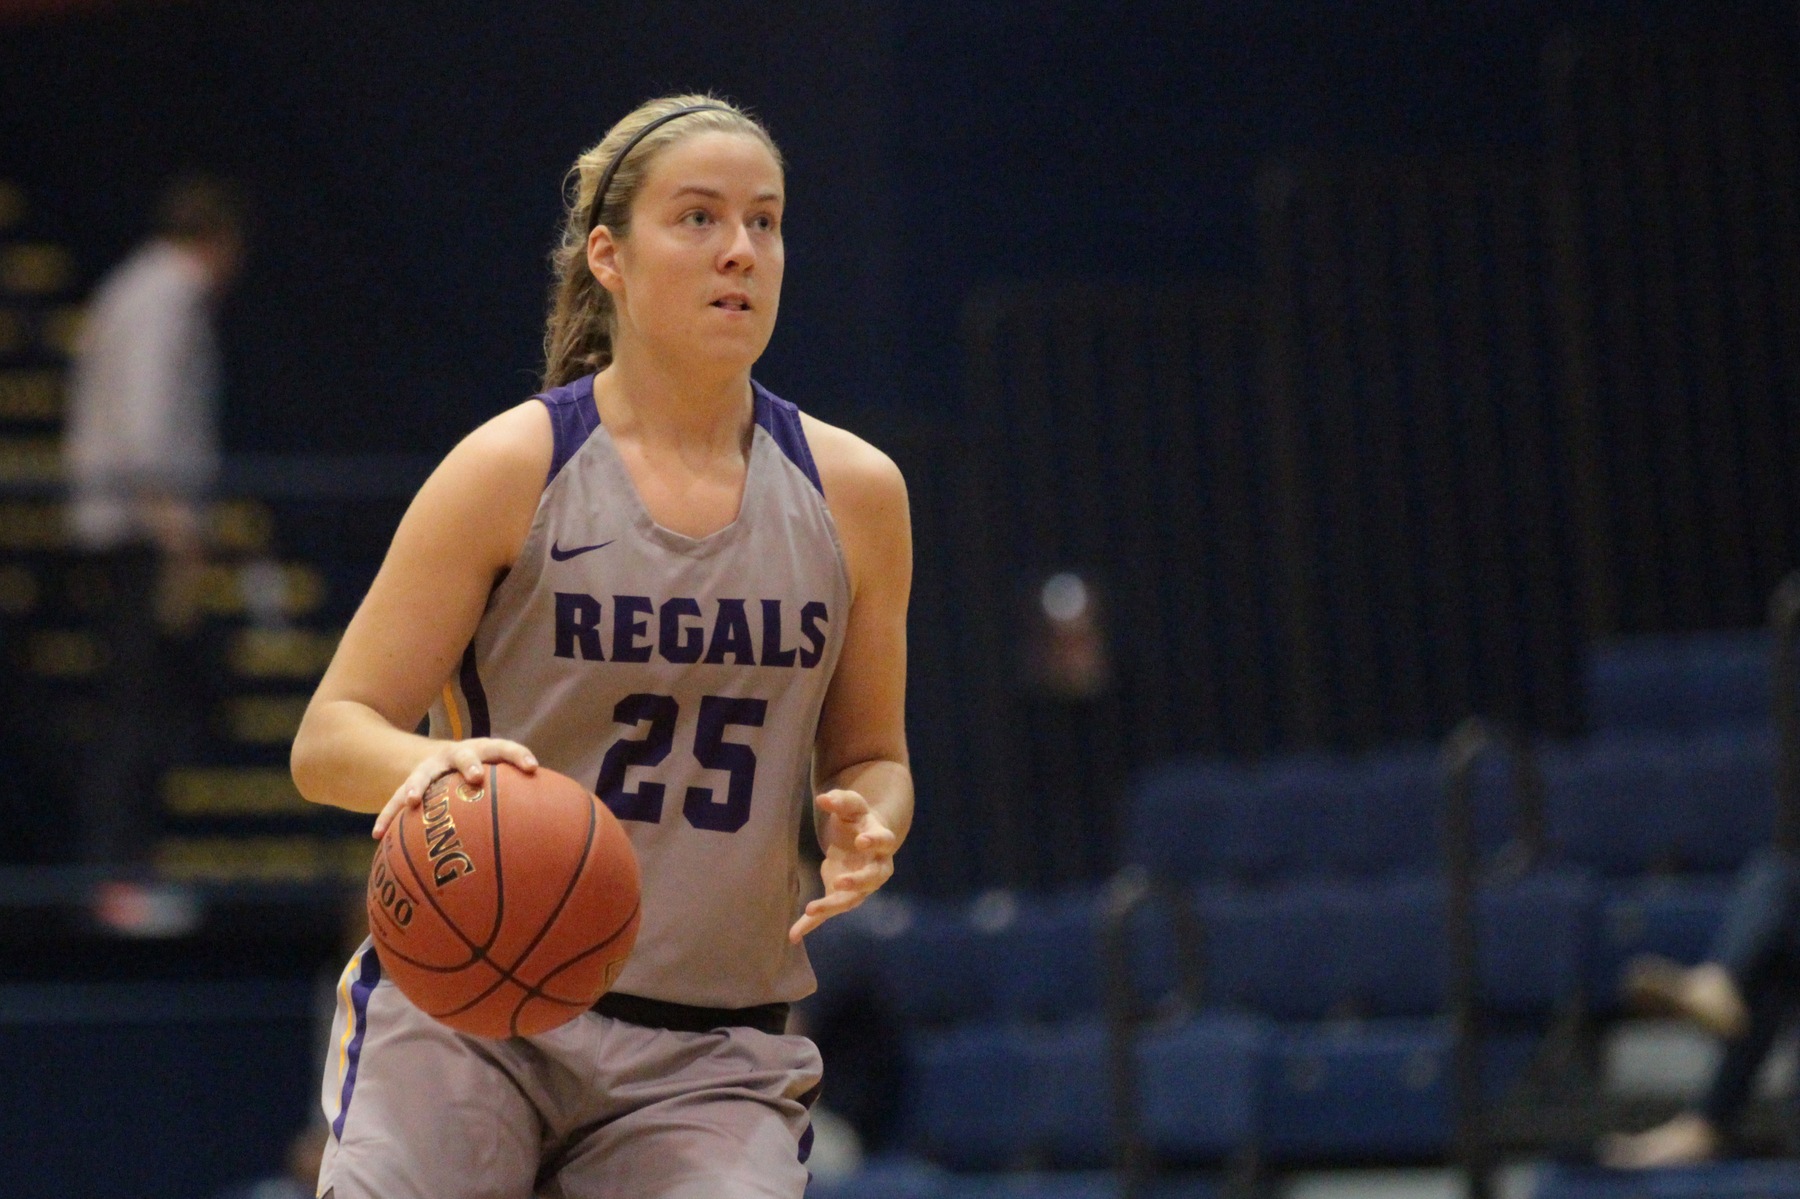 Regals Come Up Short in Rematch with Leopards